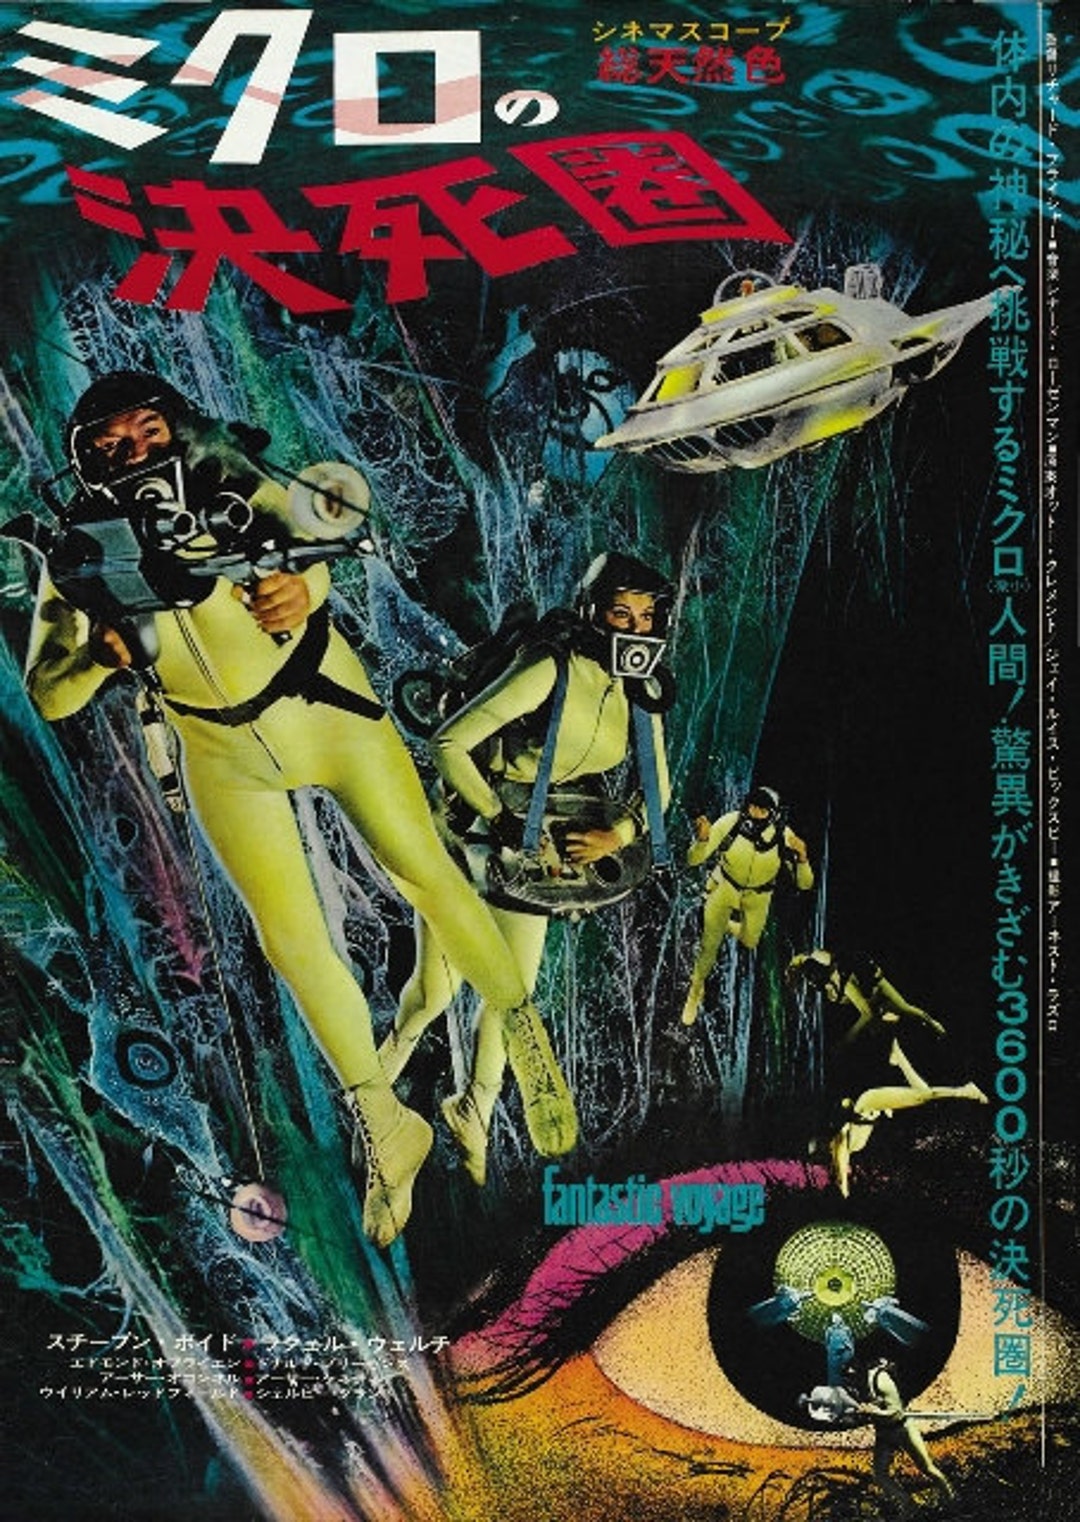 1966　Sci　Etsy　Release　Poster　Film　Fi　A3　Japanese　日本　Fantastic　Voyage